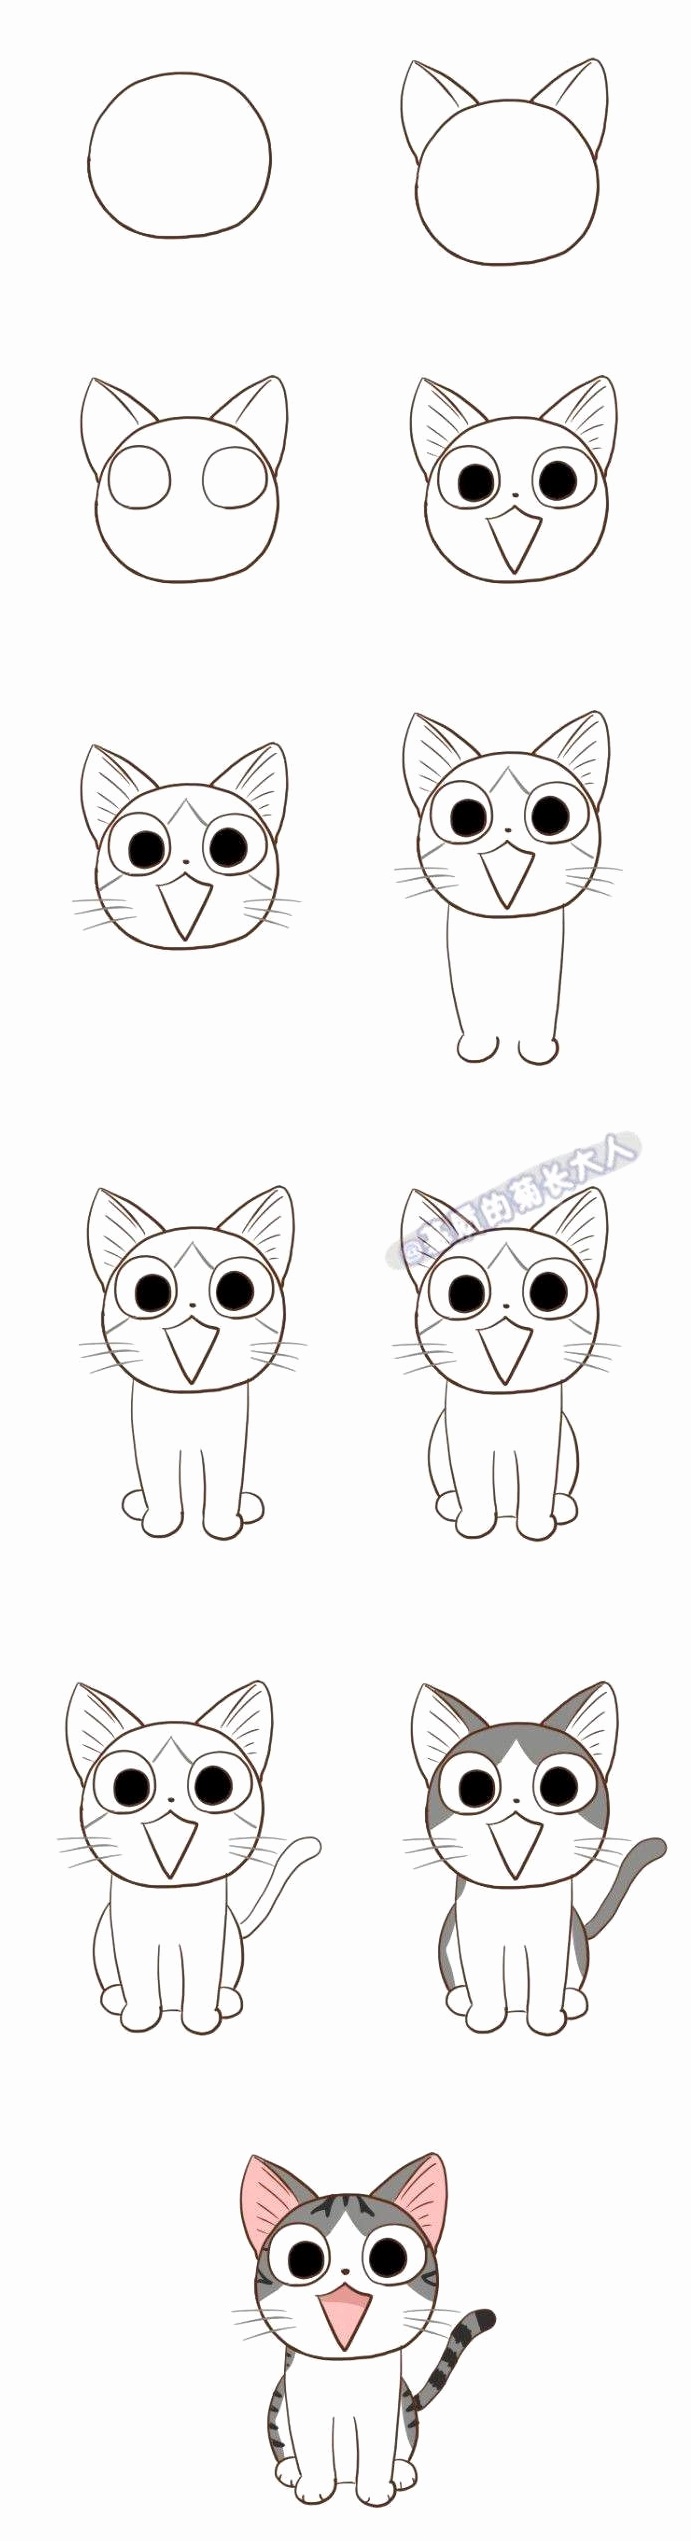 How To Draw A Cat Kawaii